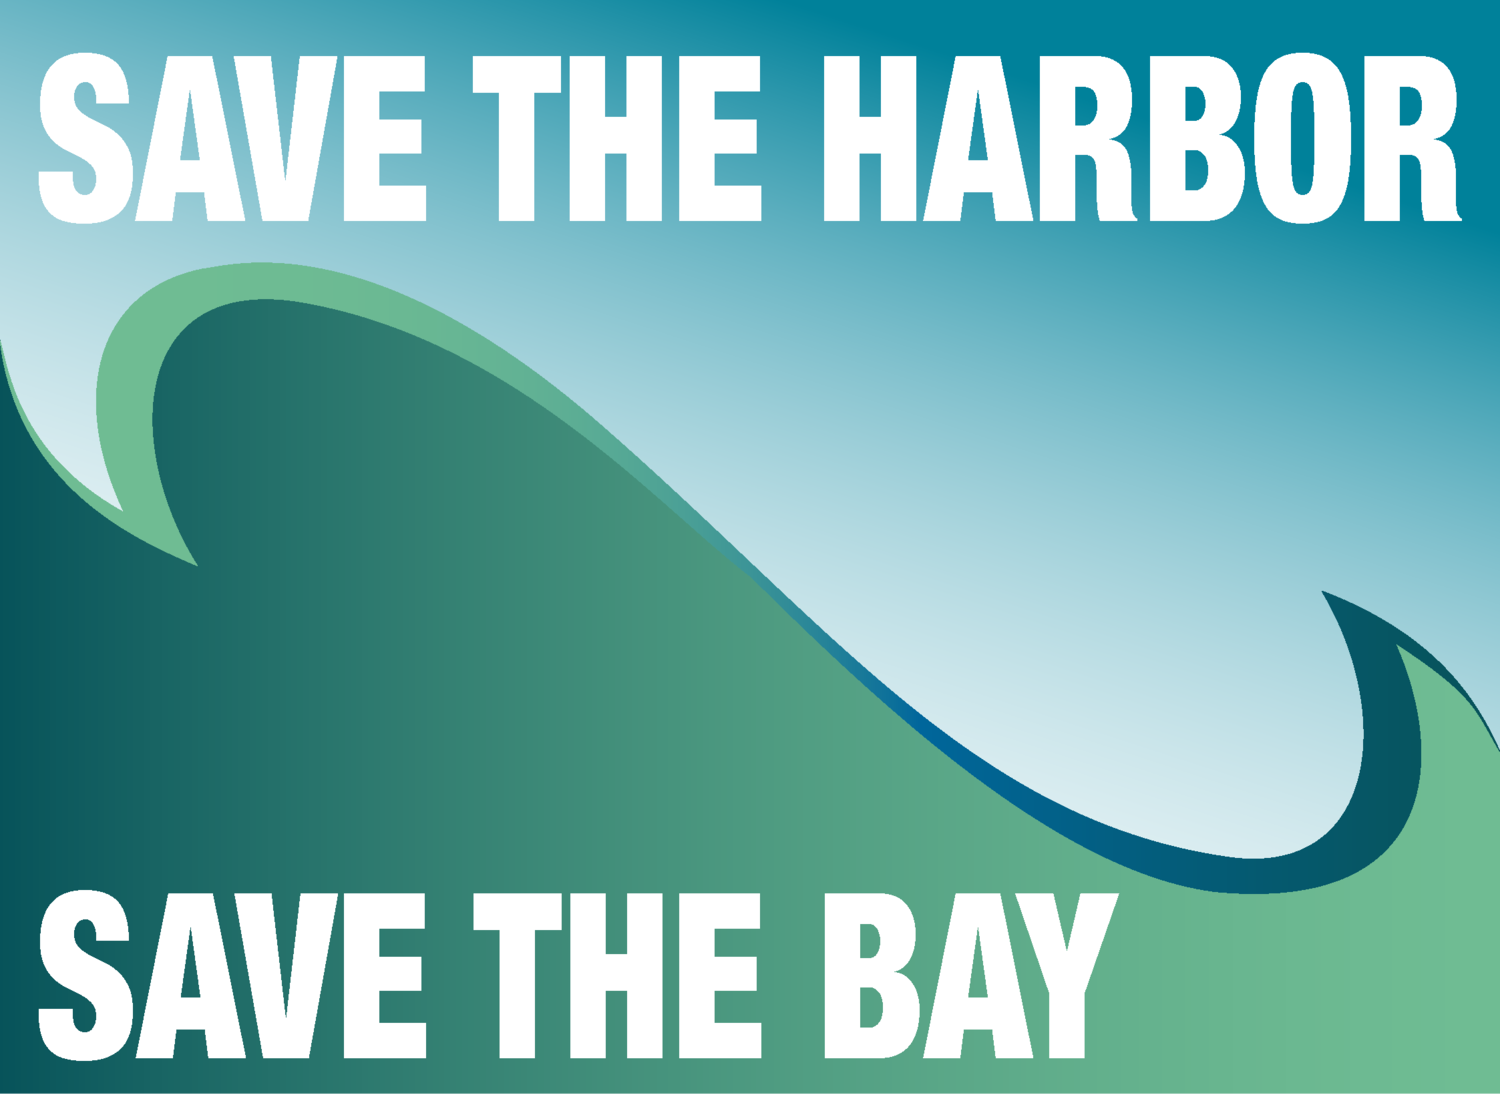 Save The Harbor Save The Bay logo